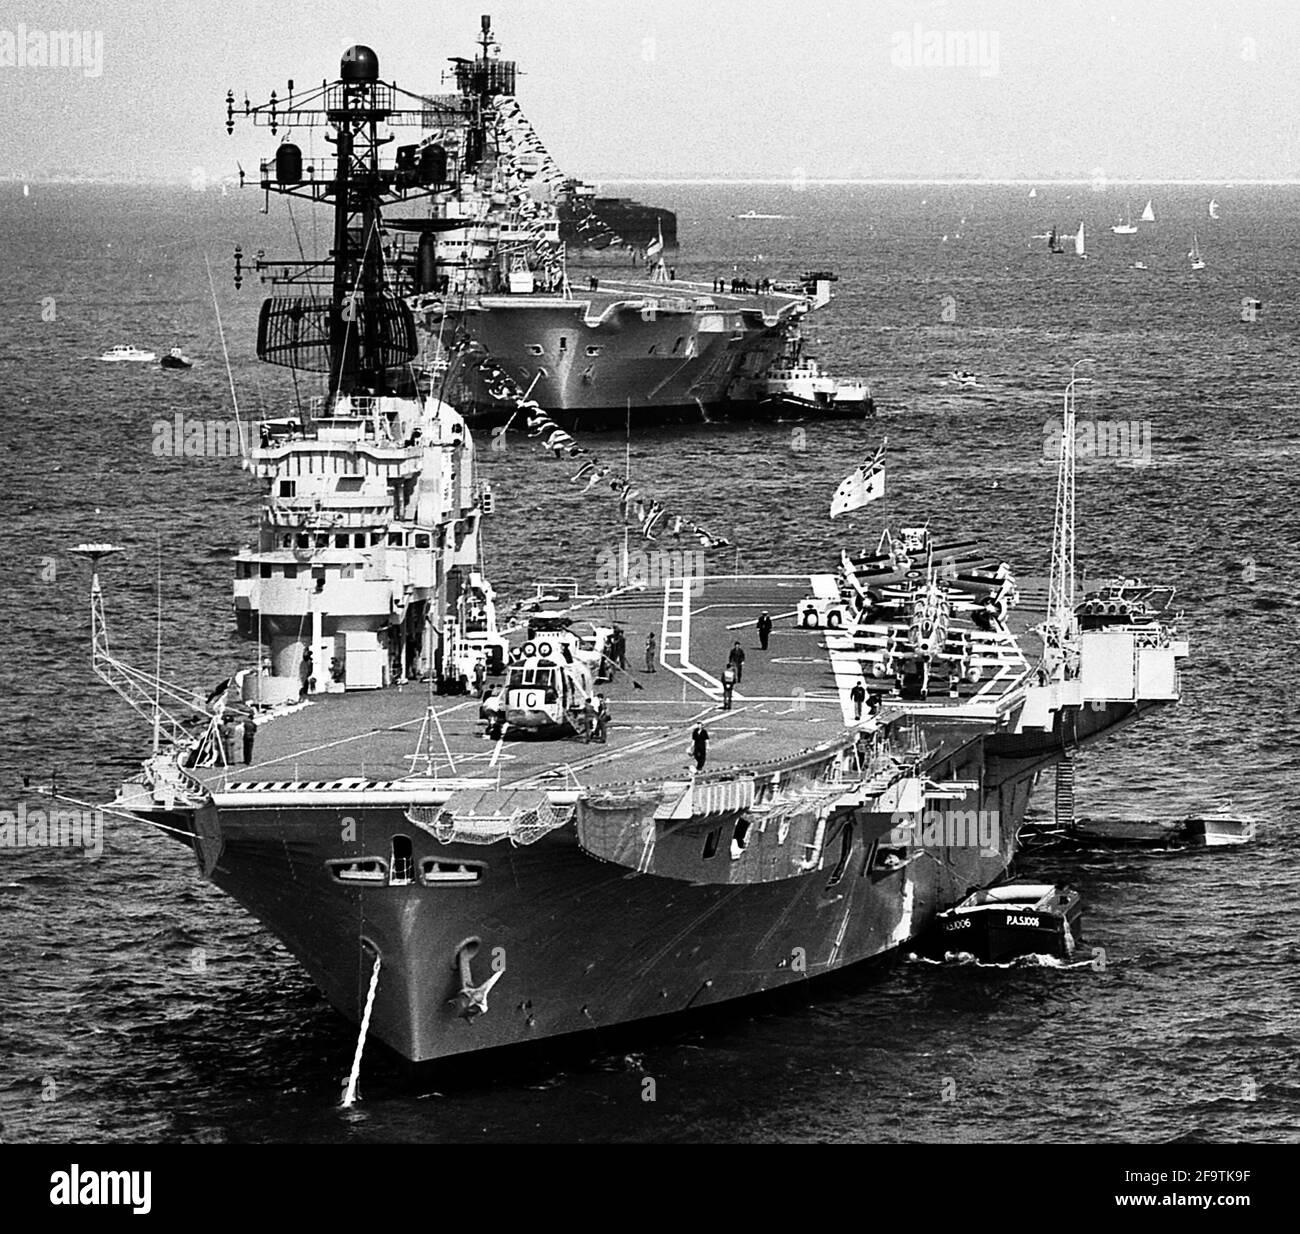 AJAXNETPHOTO. 28TH JUNE, 1977. SPITHEAD, PORTSMOUTH, ENGLAND. - LINE ASTERN - THE AIRCRAFT CARRIERS HMAS MELBOURNE AND HMS ARK ROYAL AT THE SILVER JUBILEE FLEET REVIEW.  PHOTO:JONATHAN EASTLAND/AJAX.  REF:EPS 120104 12 1 Stock Photo